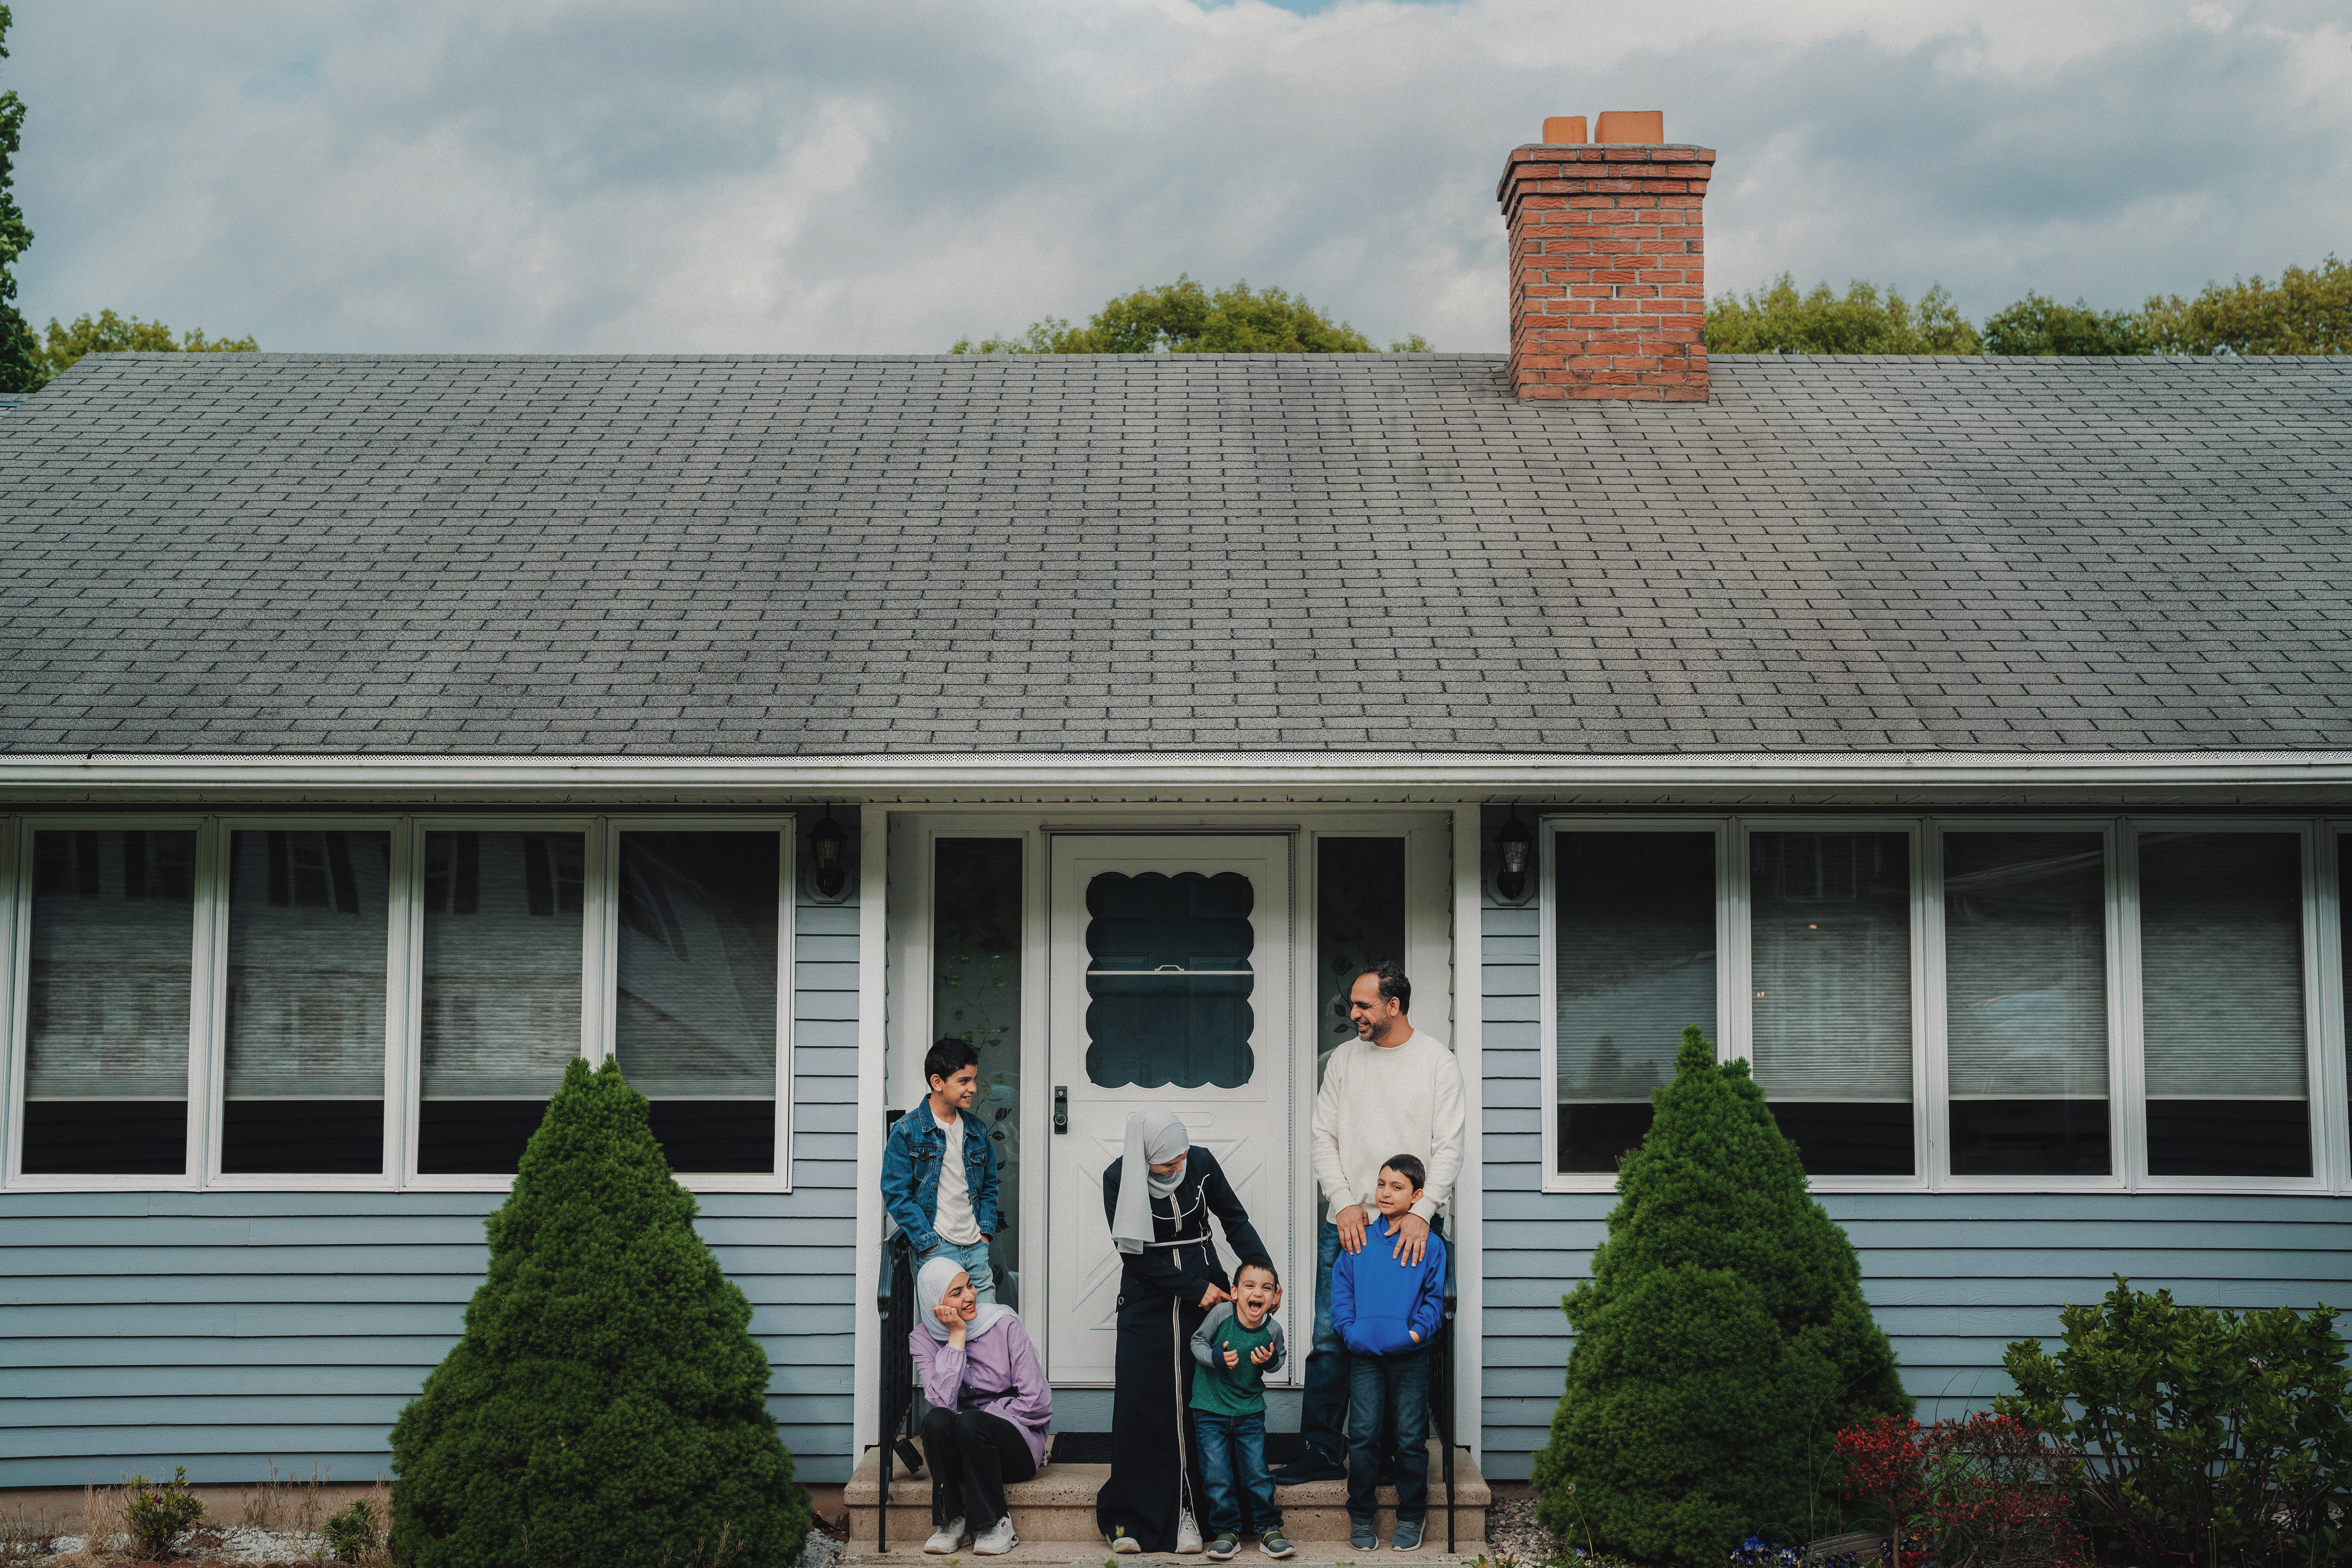 Two parents and their three kids stand on the porch of a house with a grey roof and brick chimney